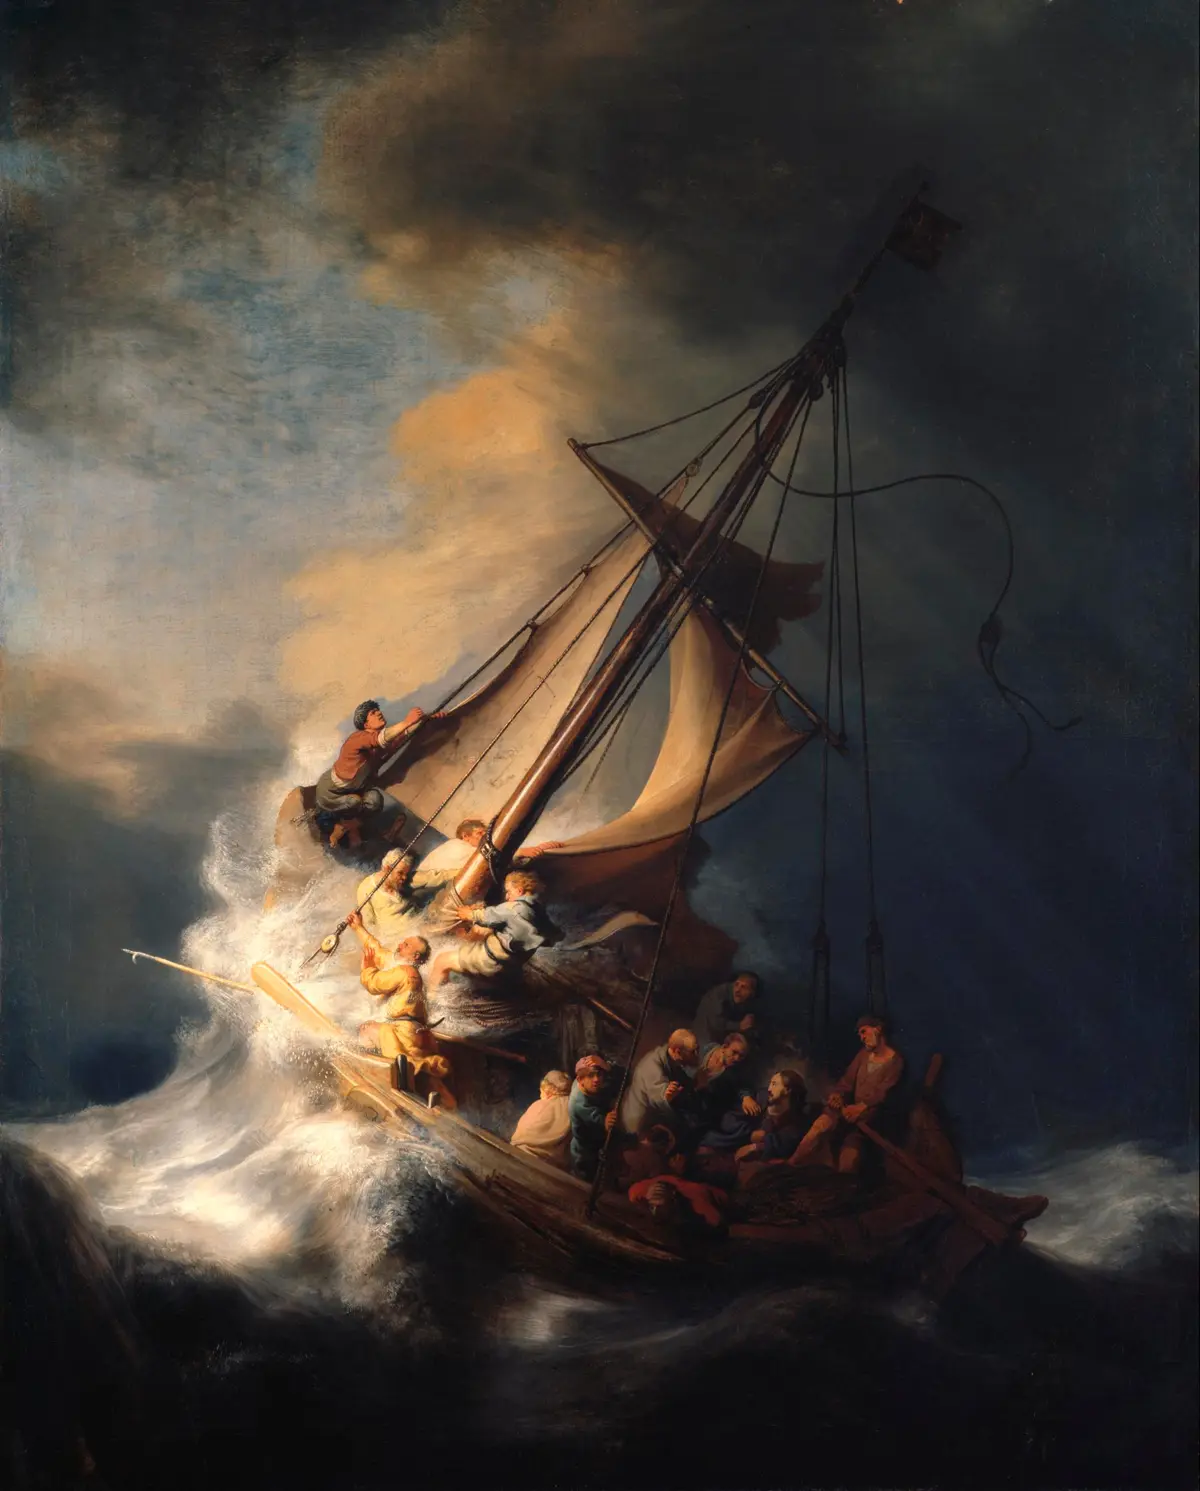 Rembrandt's The Storm on the Sea of Galilee